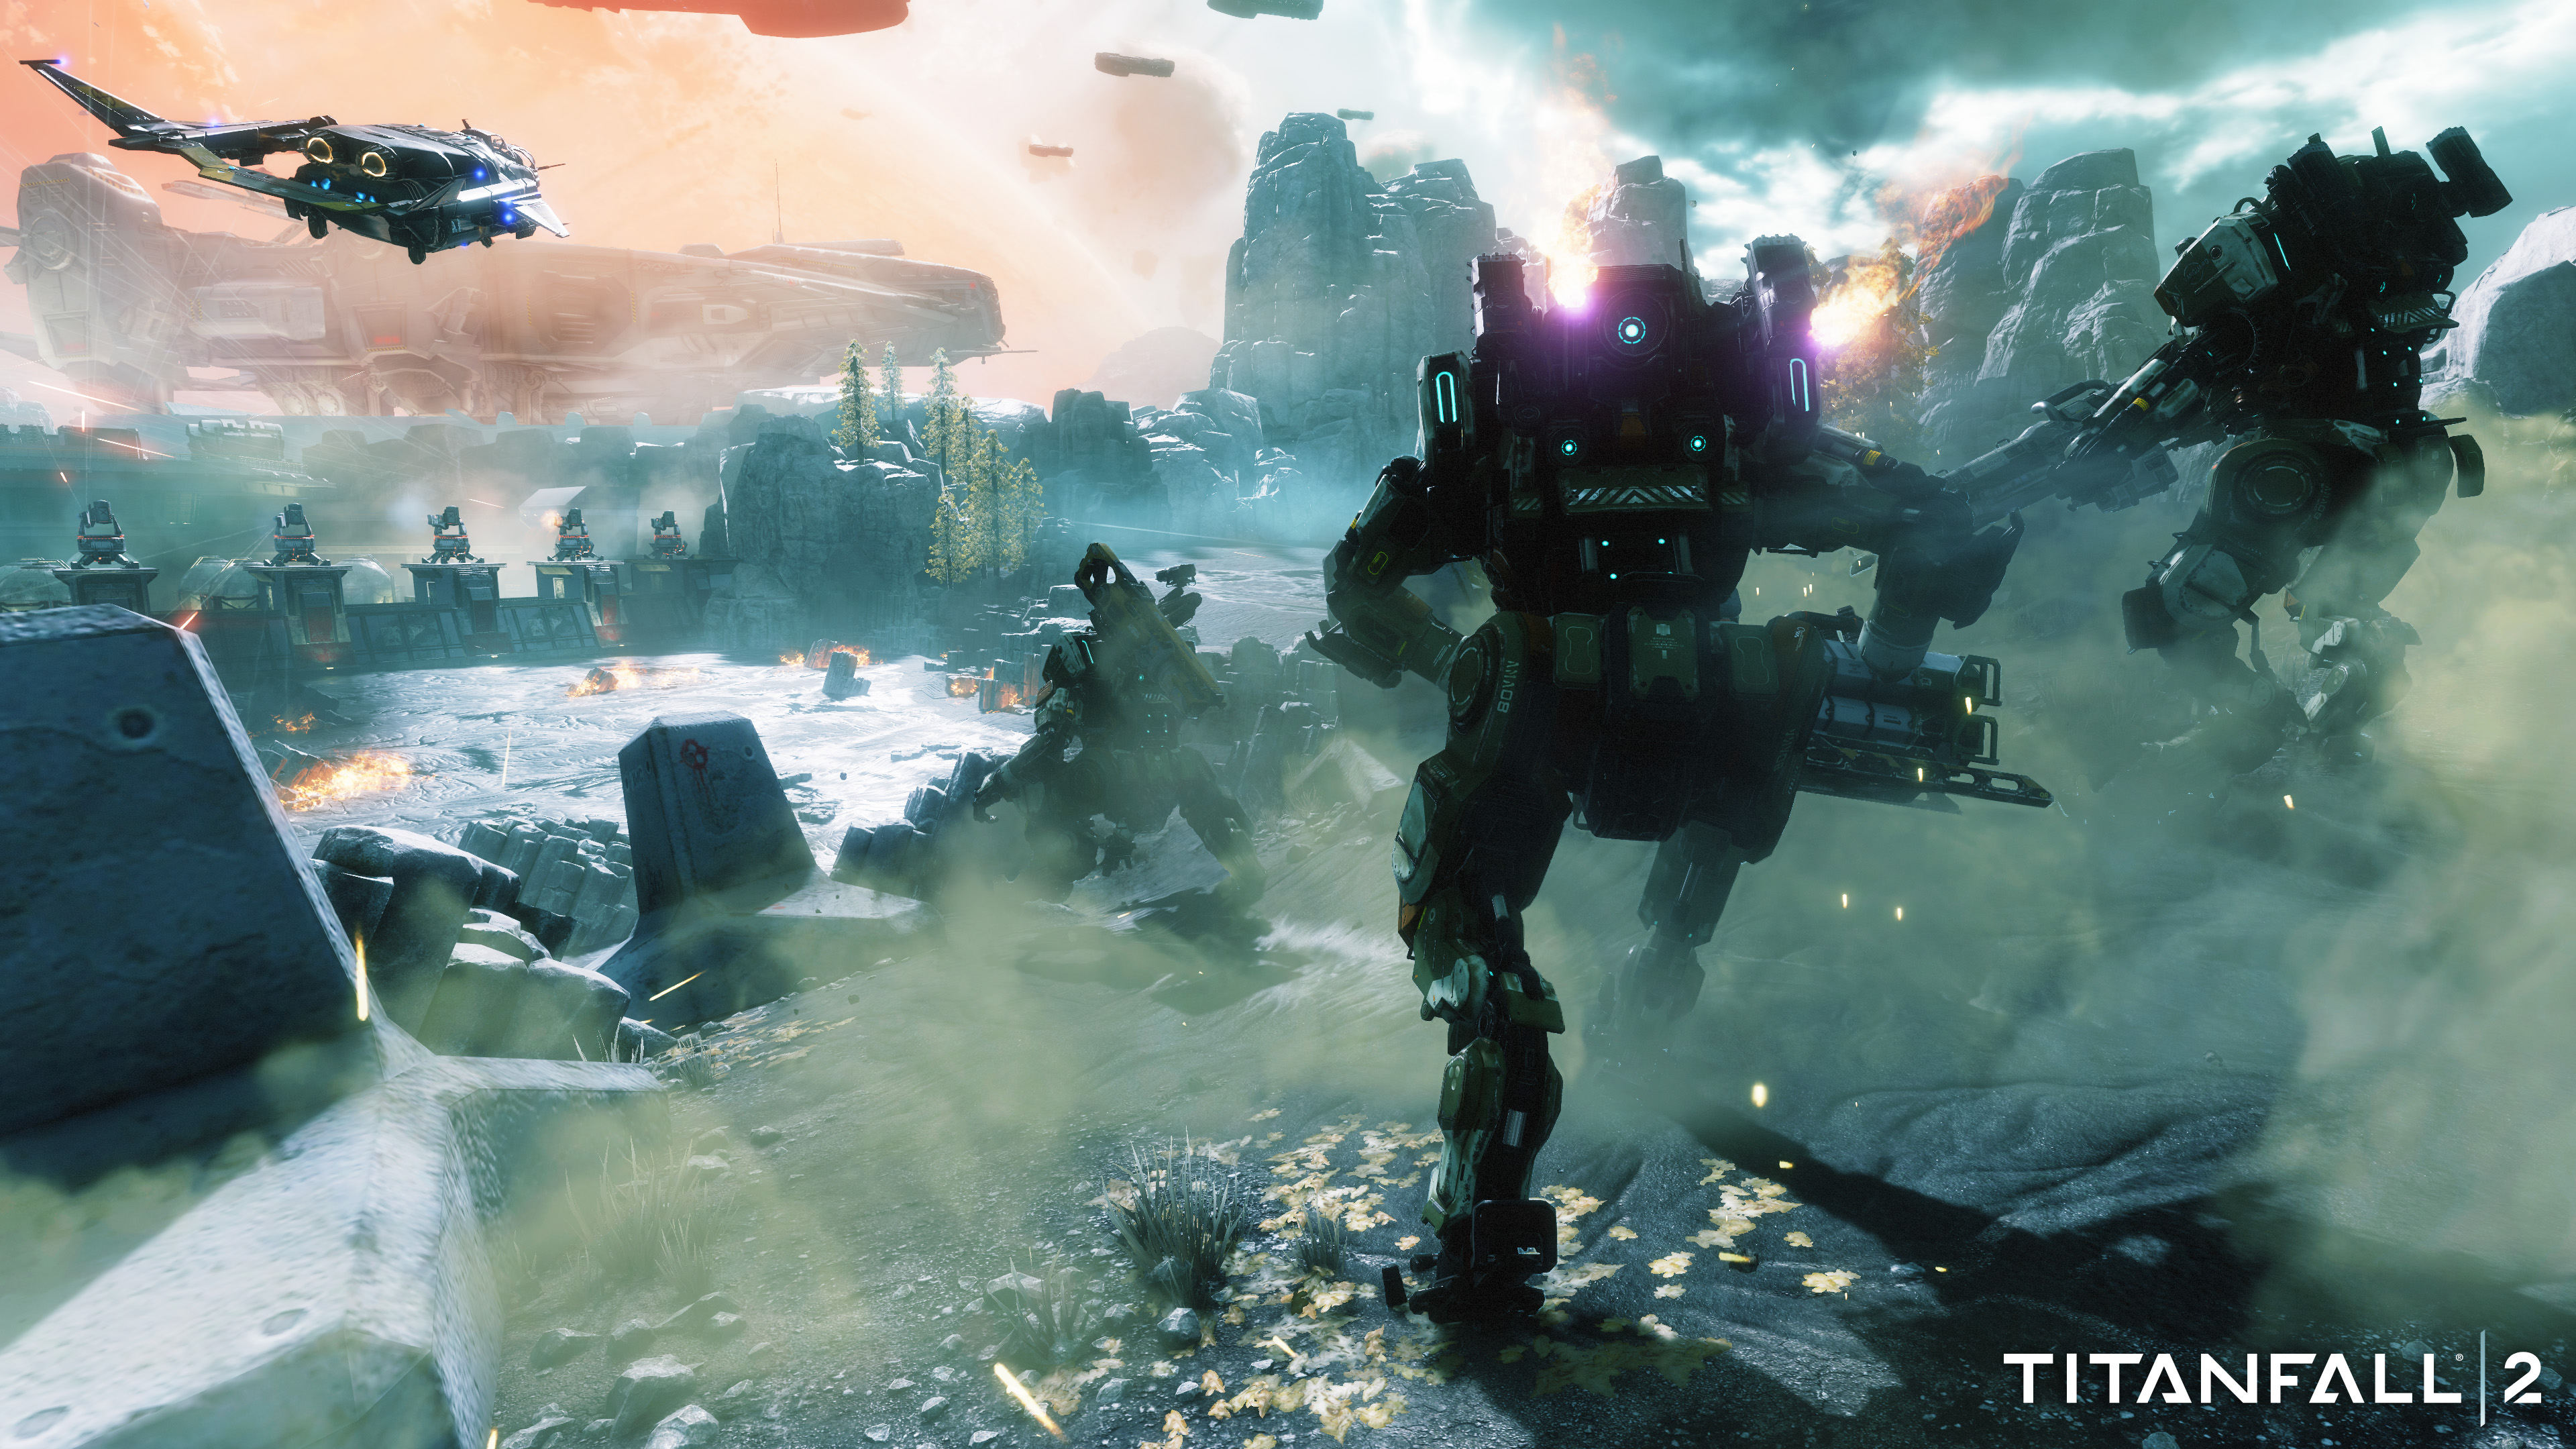 Titanfall 2, Electronic Arts, PlayStation 4, [Physical], 014633368741 - image 5 of 9